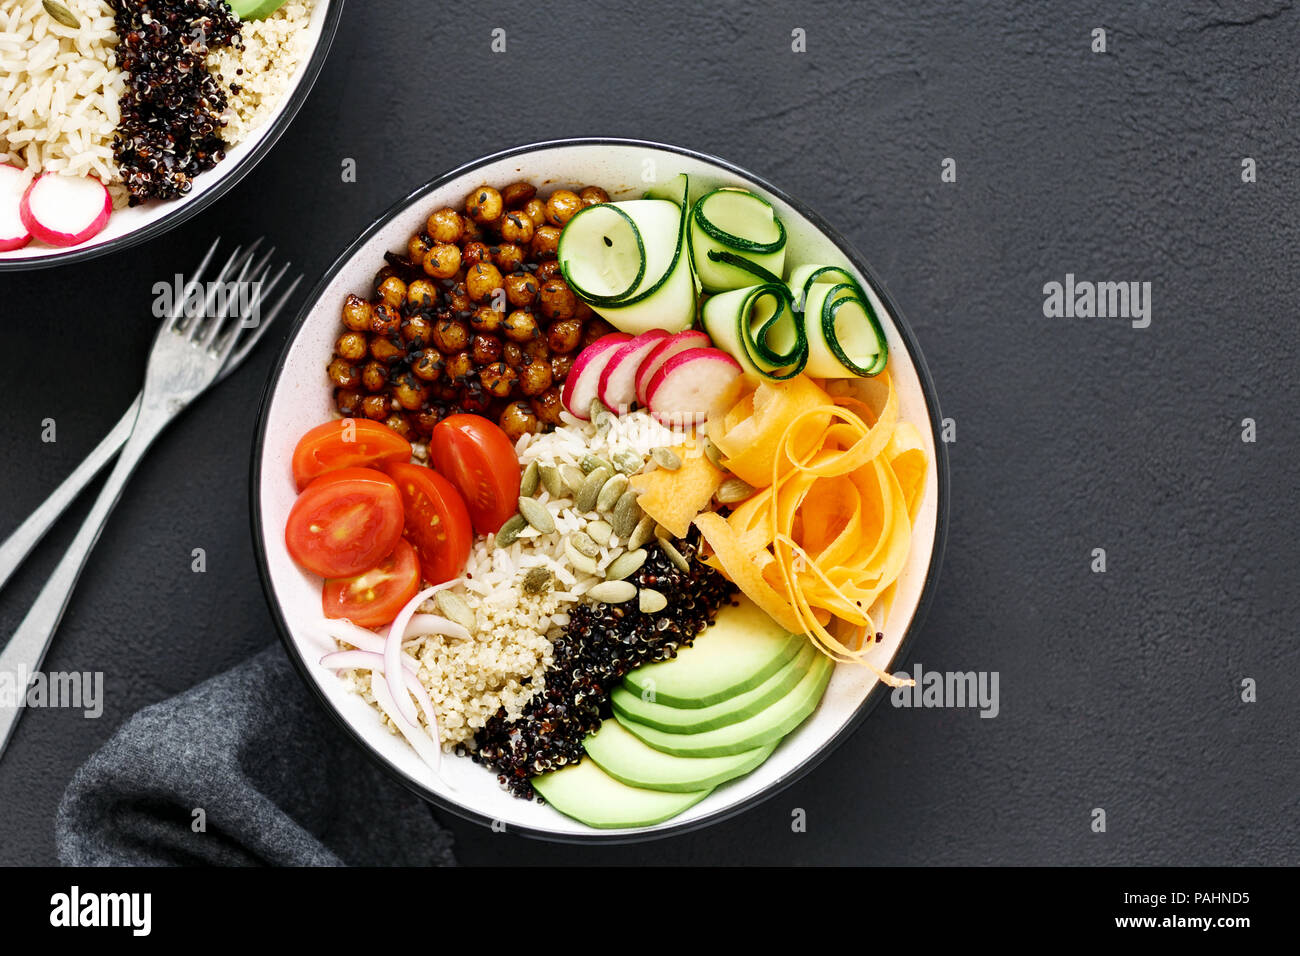 Clean and balanced healthy food concept. Two vegetarian buddha bowl. Rice, spicy chickpeas, black and white quinoa, avocado, carrot, zucchini, radish, Stock Photo